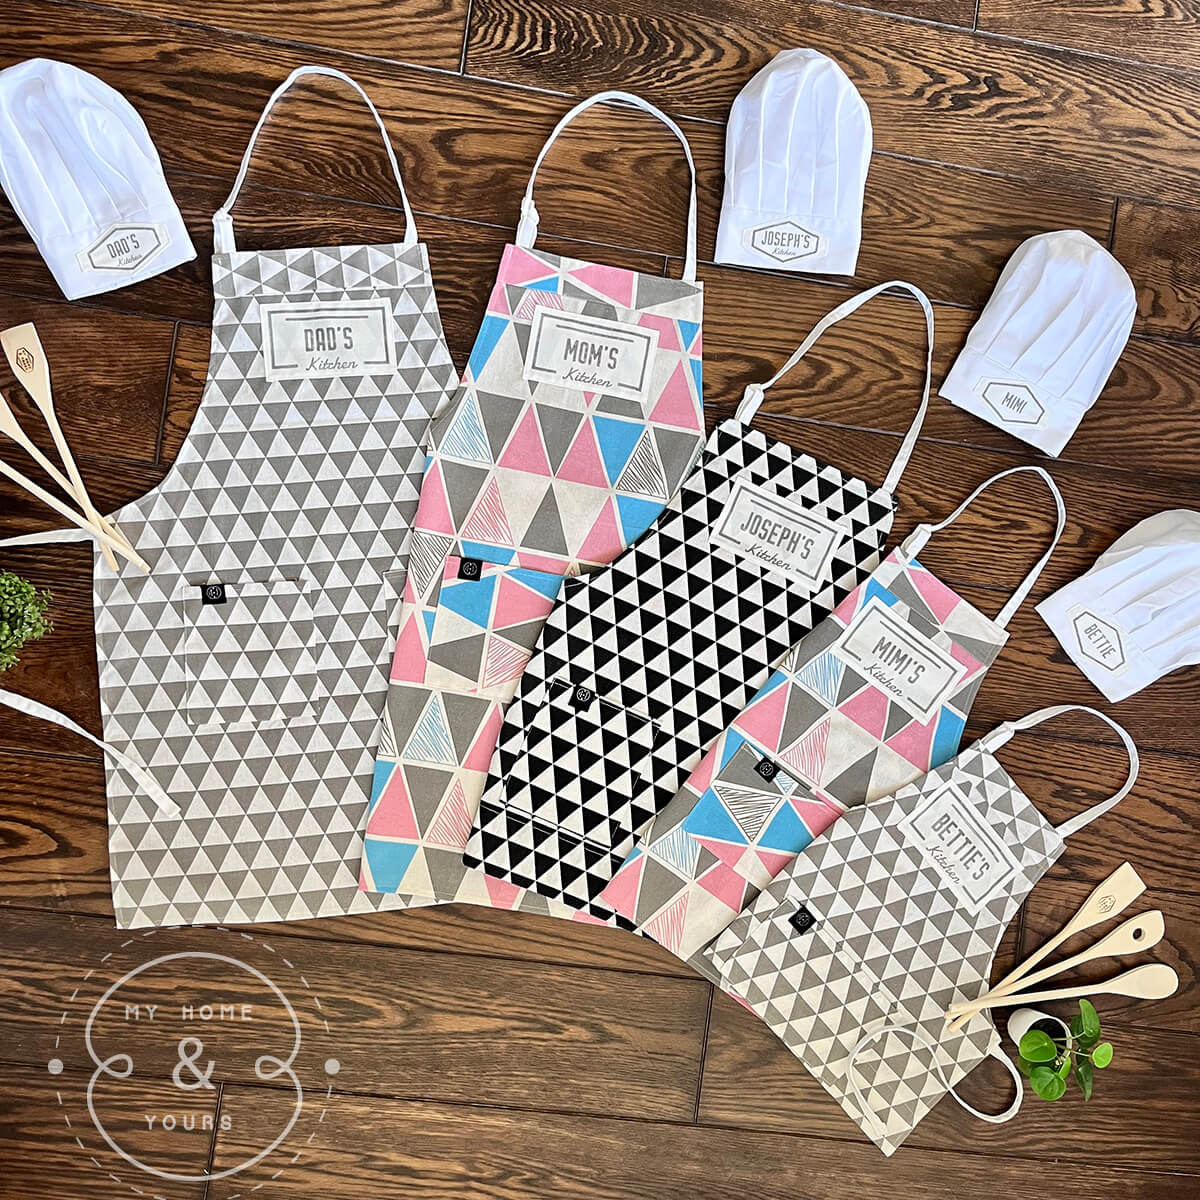 unique custom quality aprons for the whole family with personalised name and text for toddler kids teens to adult size in three cute color patterns